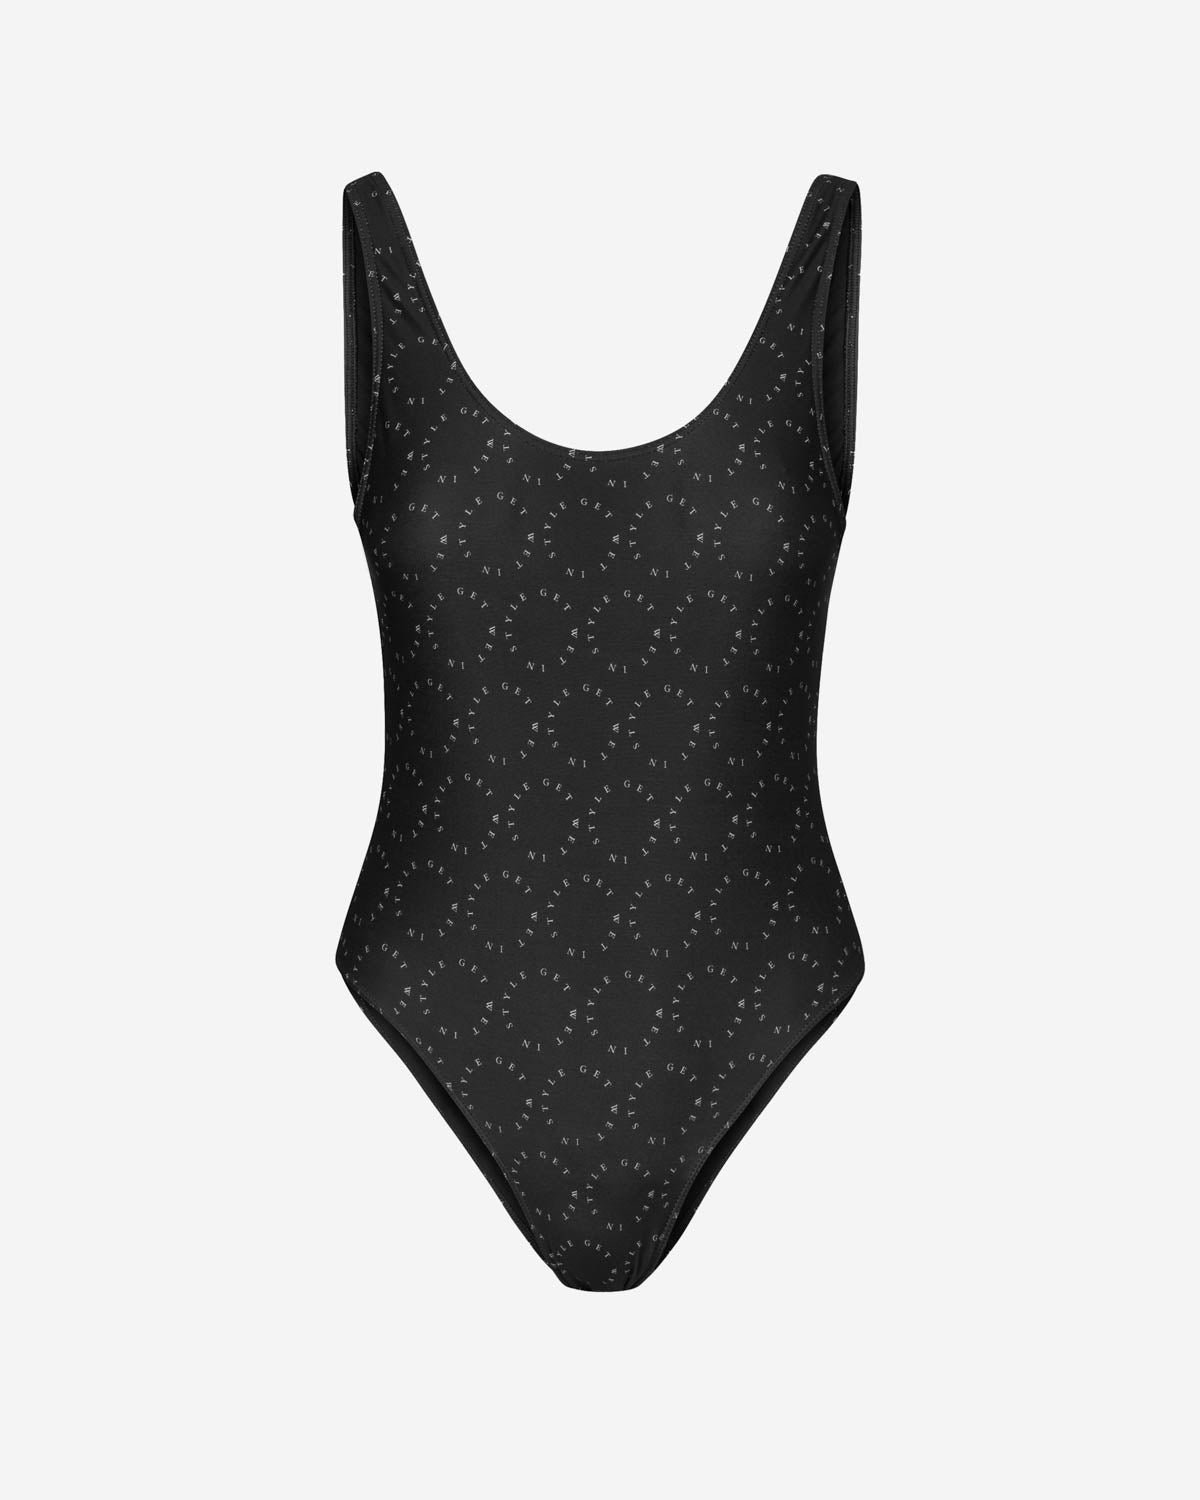 Black swimsuit with white text